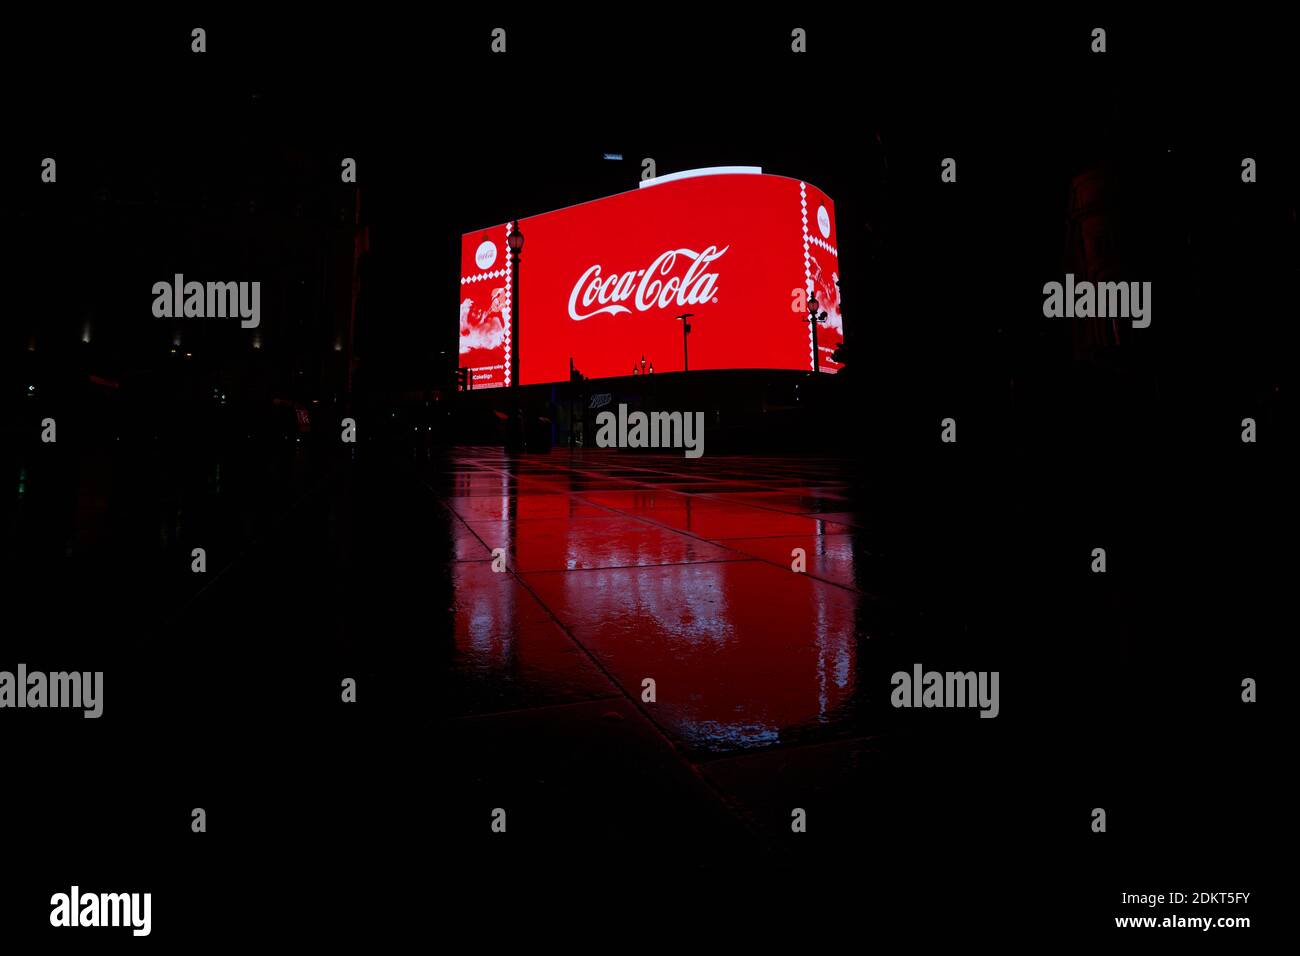 London, UK. - 15 Dec 2020: A Coco-cola advert on the giant illuminated billboard at Piccadilly Circus reflected on a wet pavement on the road opposite. Stock Photo